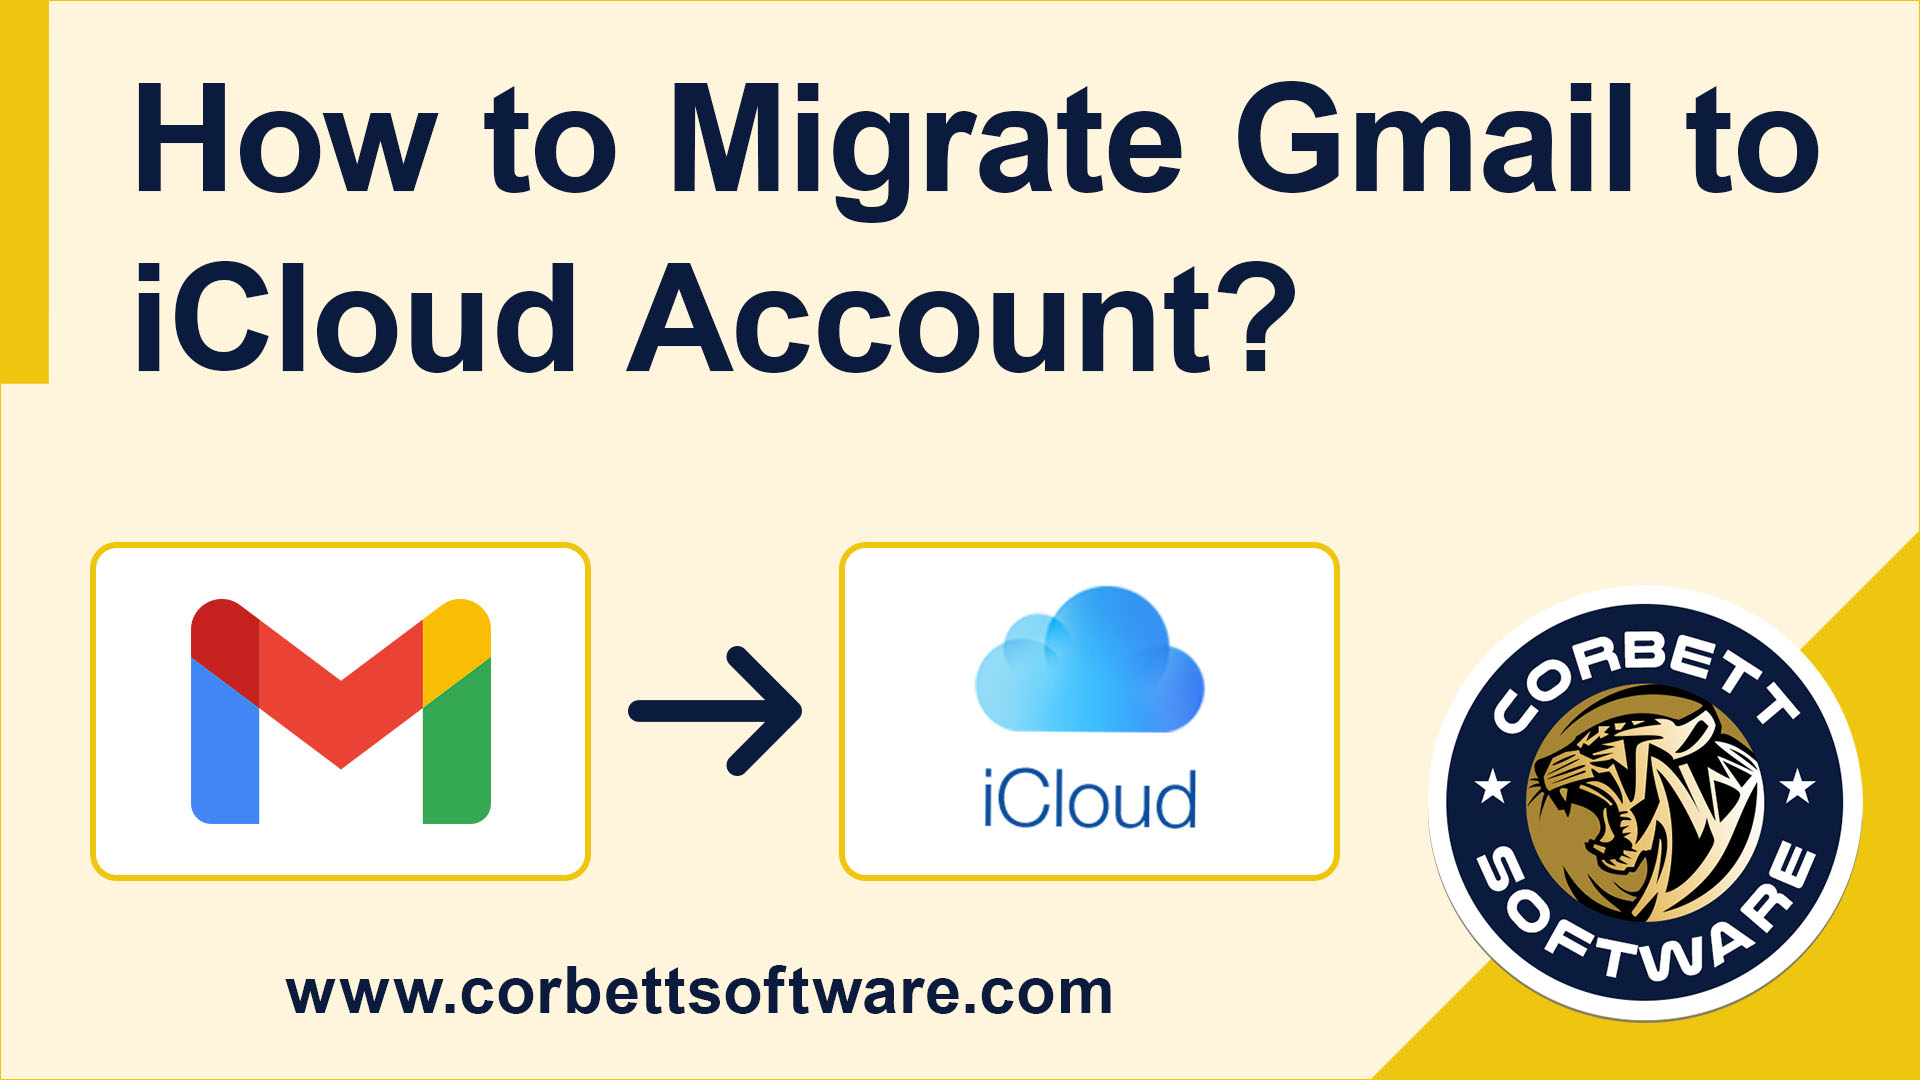 Migrate Gmail to iCloud Easily Switch from Gmail Account to iCloud